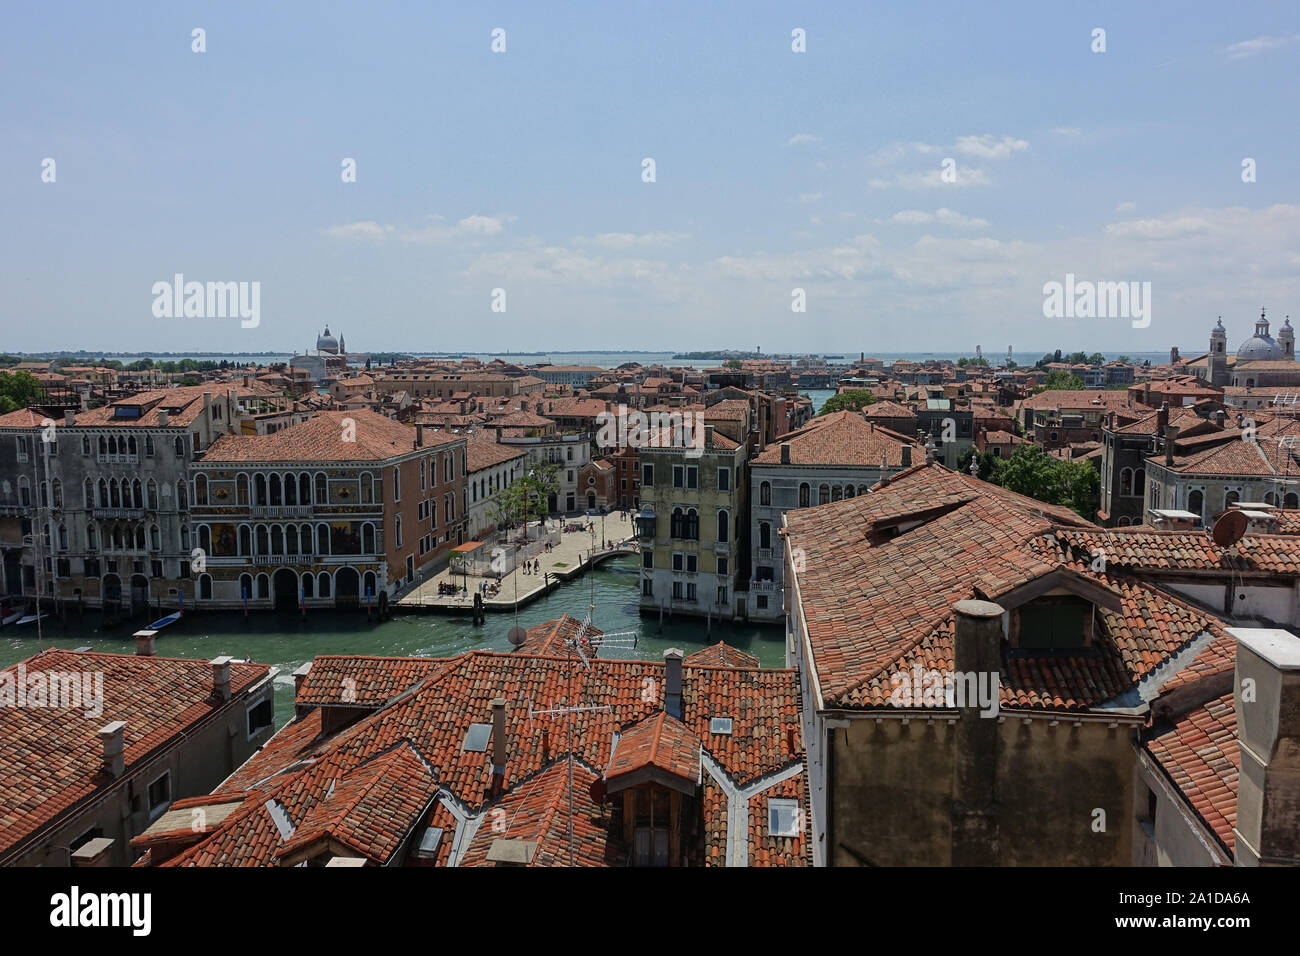 Venedig, Ausblick vom Turm der Musikakademie - Venice, Overview from the Tower of the Music Academy Stock Photo